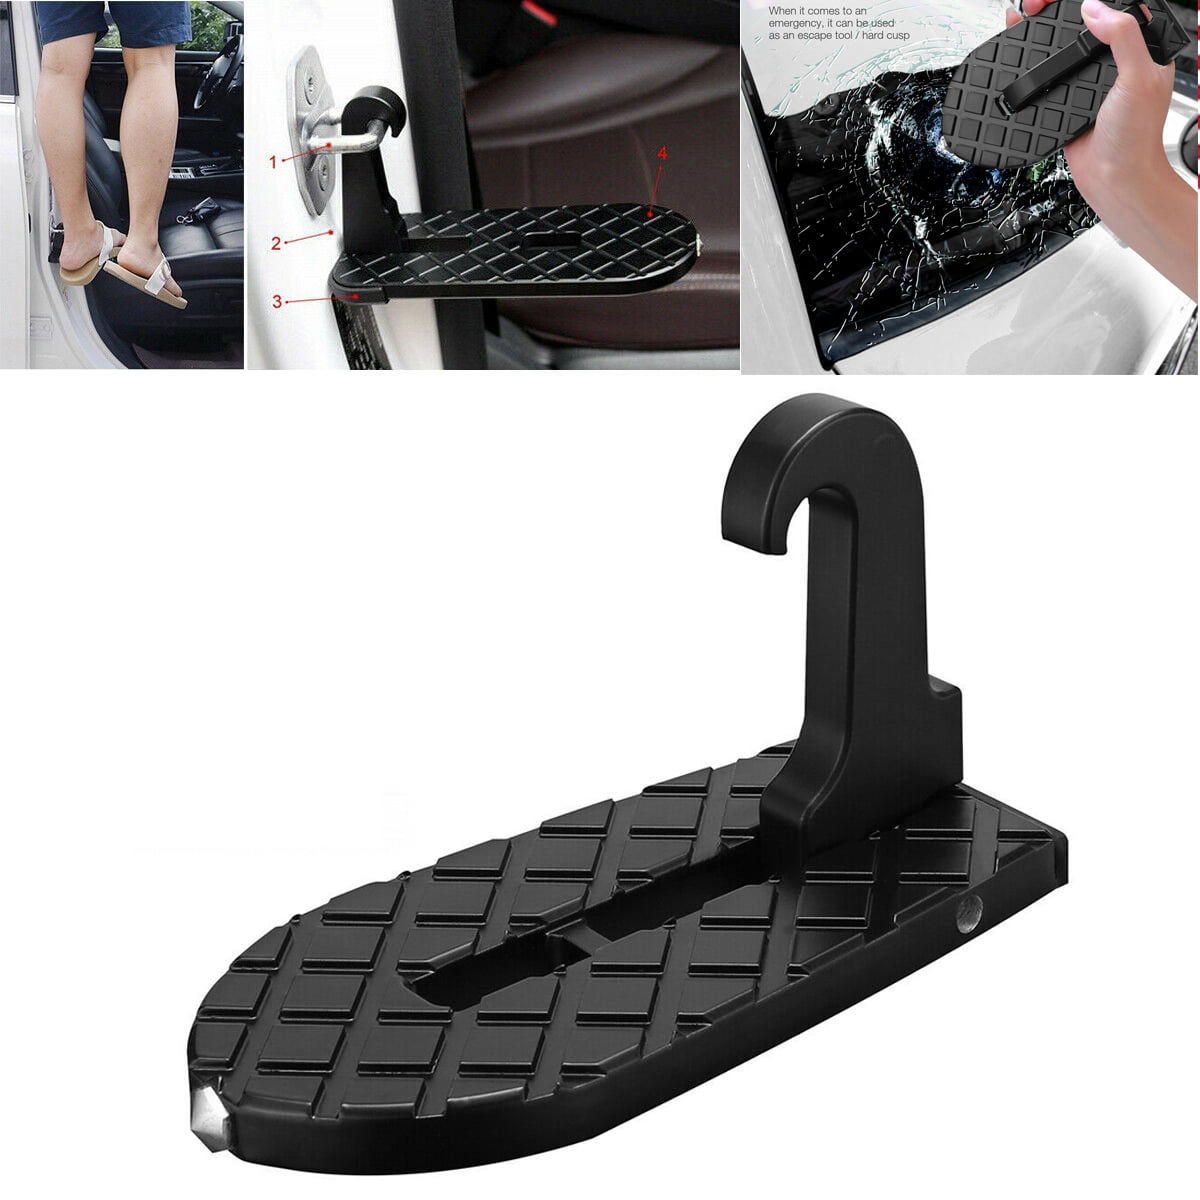 PACASK New Mini Folding Portable Car Door Latch Hook Step Foot Pedals Ladder for Jeep SUV Truck Roof